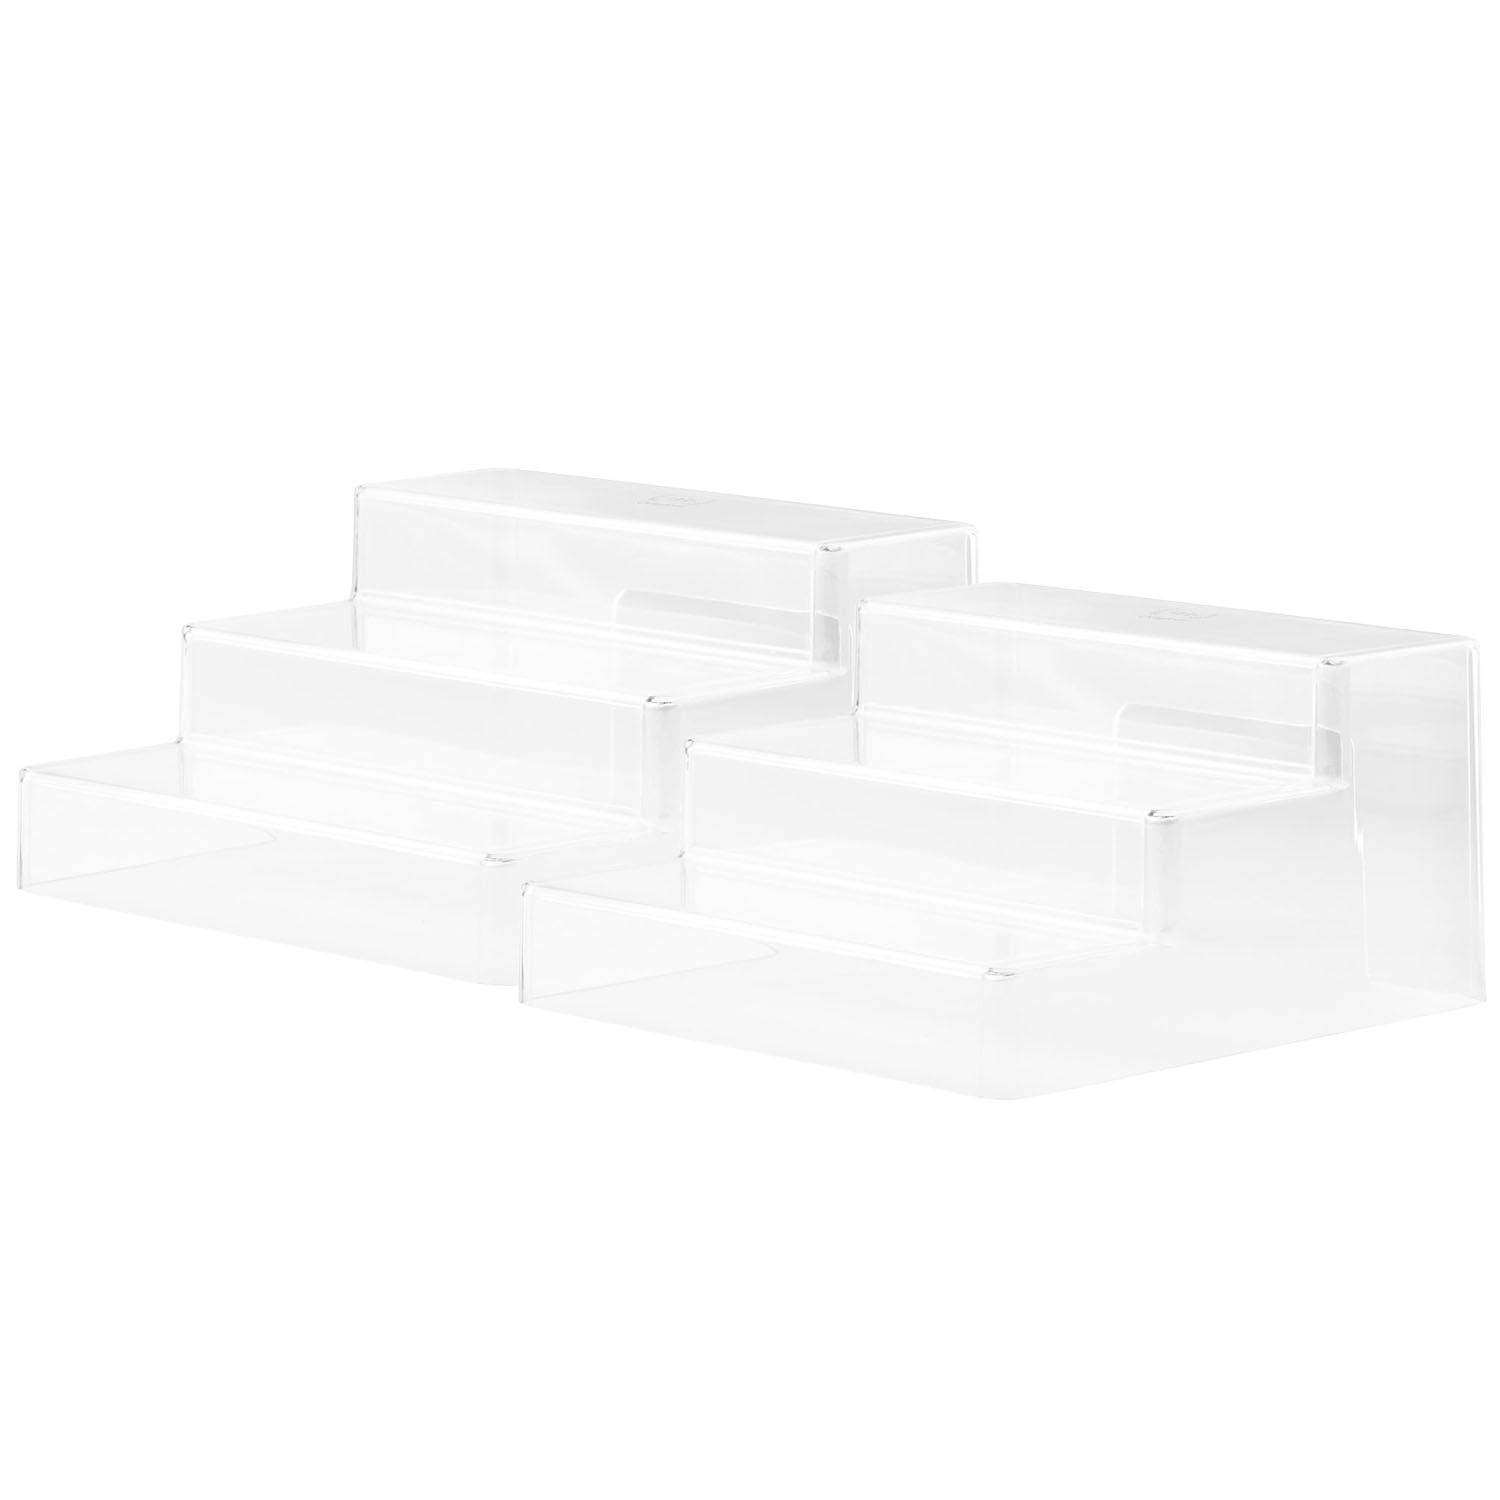 The Home Edit Clear 3-Tier Riser, Pack of 2, 9.57" x 9.57" x 5" Plastic Modular Storage System Cabinet Organizer - image 4 of 6